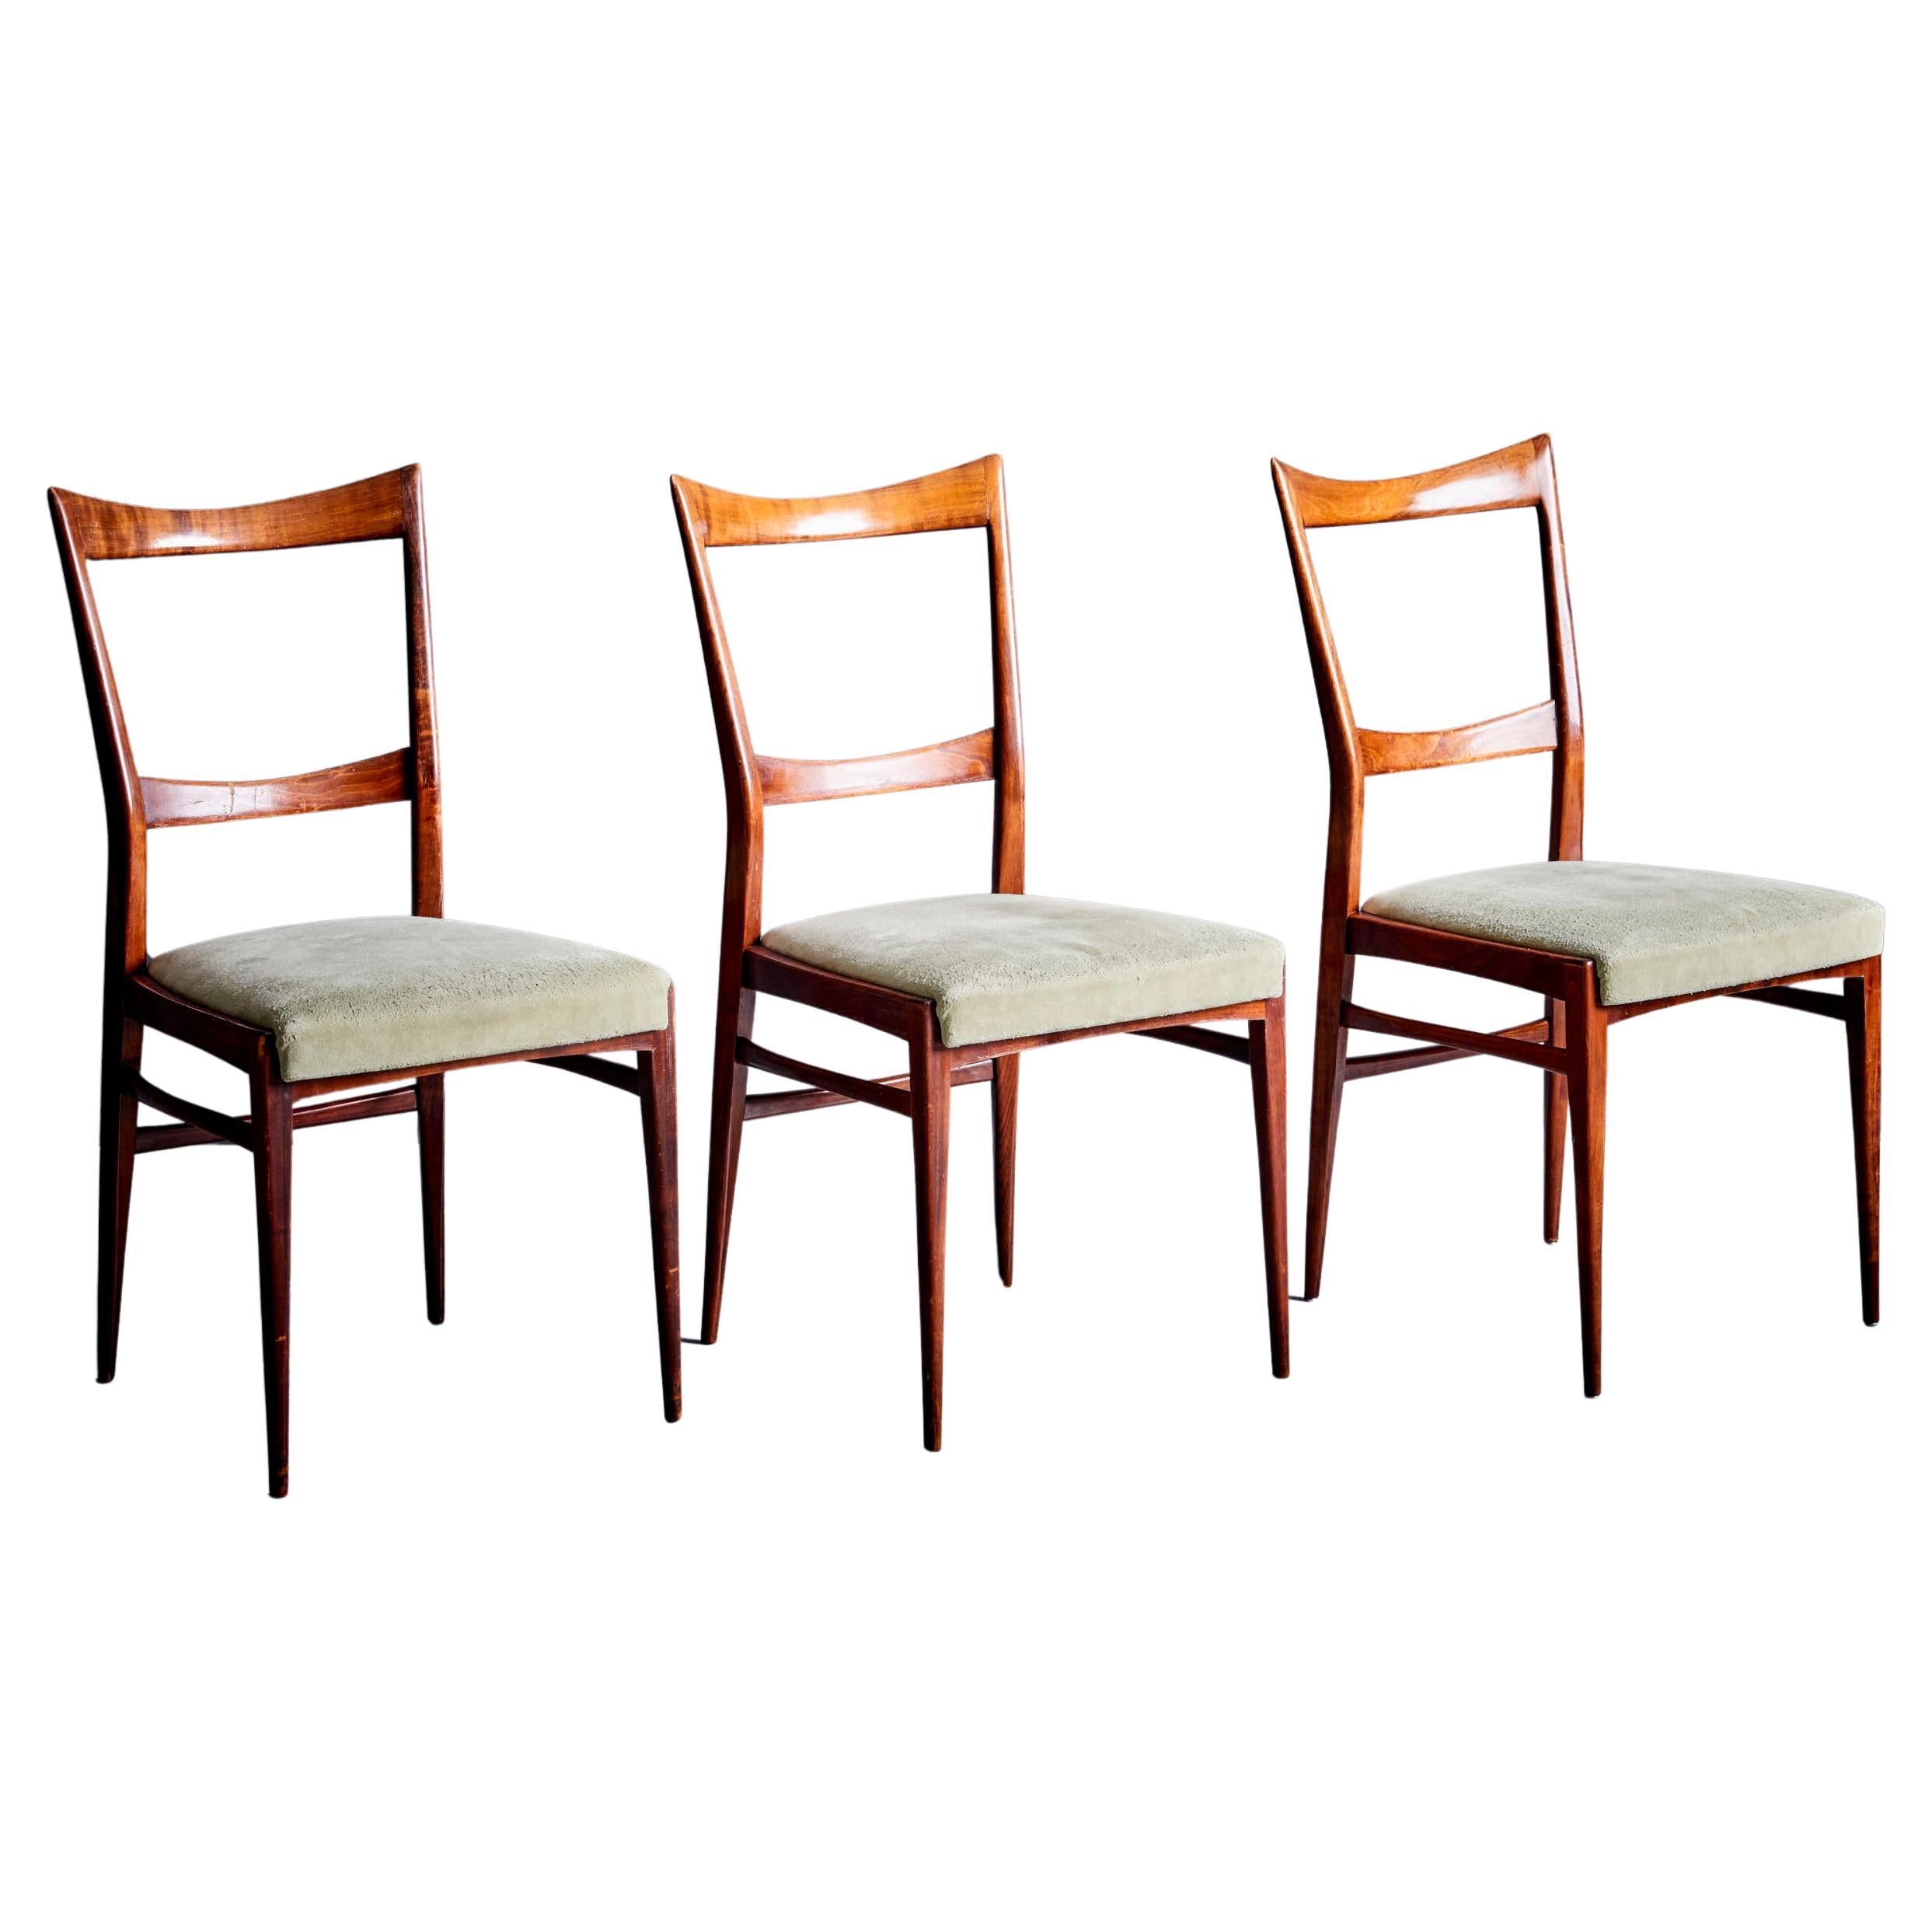 Set of 3 Mahogany Dining Chairs in the manner of Ico Parisi 1960s